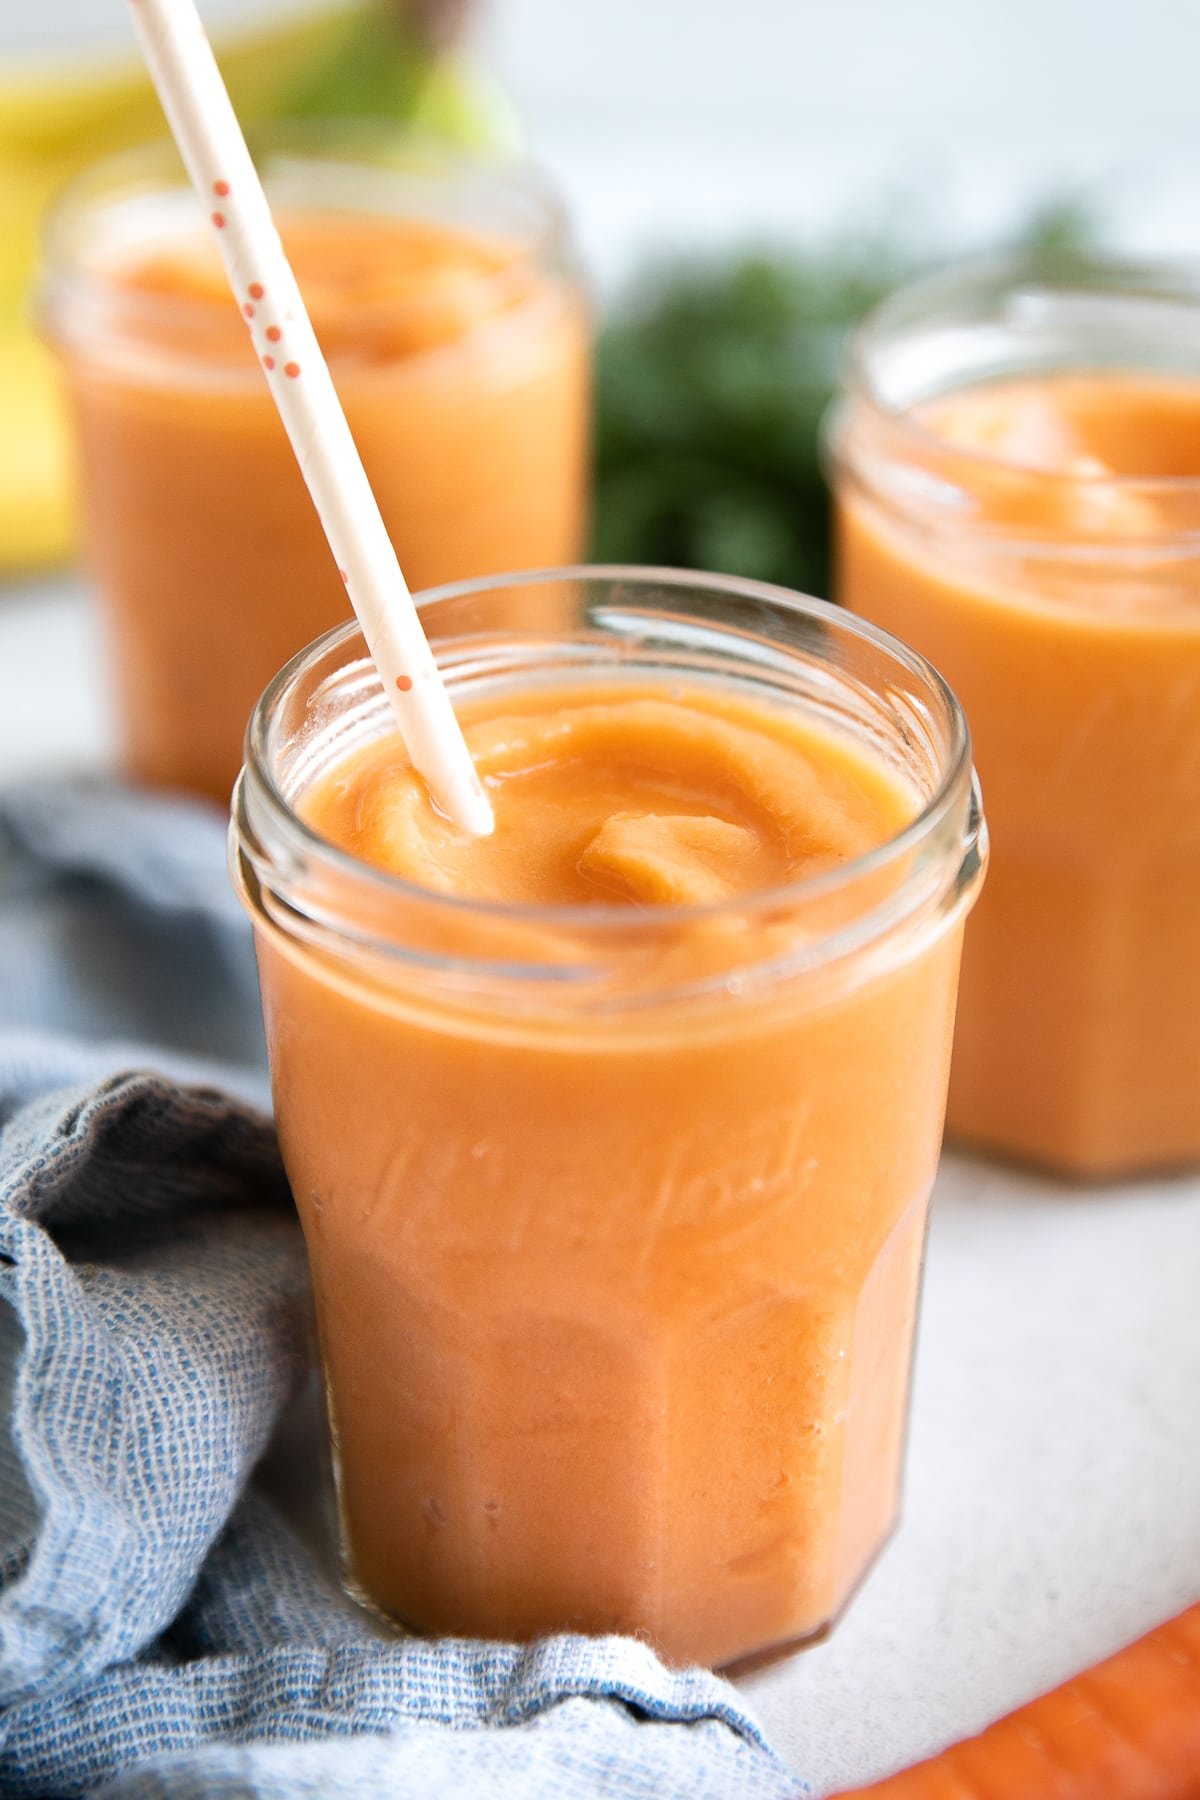 Tropical Carrot Smoothie Recipe - The Forked Spoon